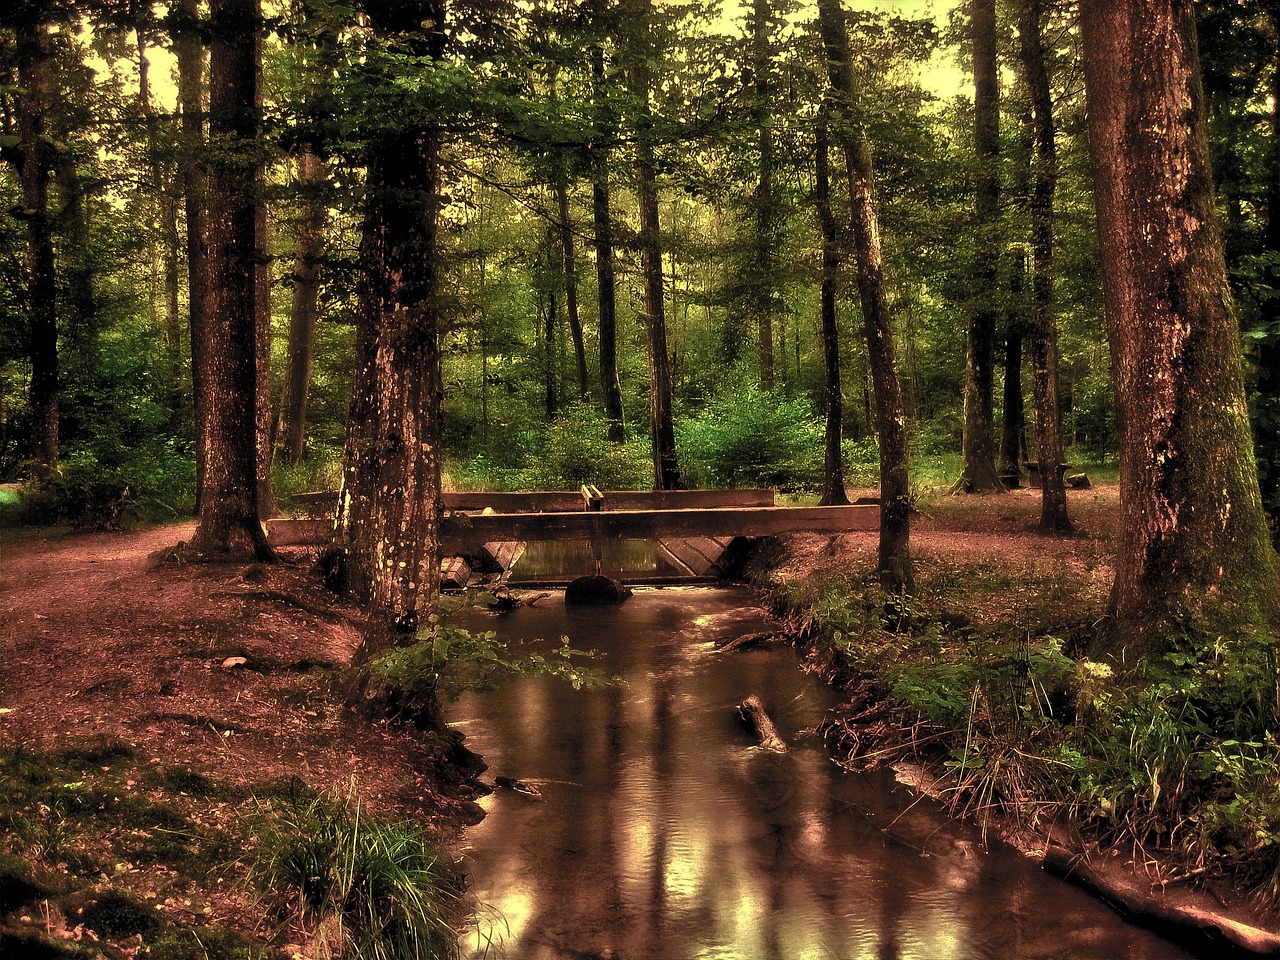 a small stream running through a forest filled with trees, inspired by Henri Biva, flickr, wood bridges, [[fantasy]], summer evening, belgium